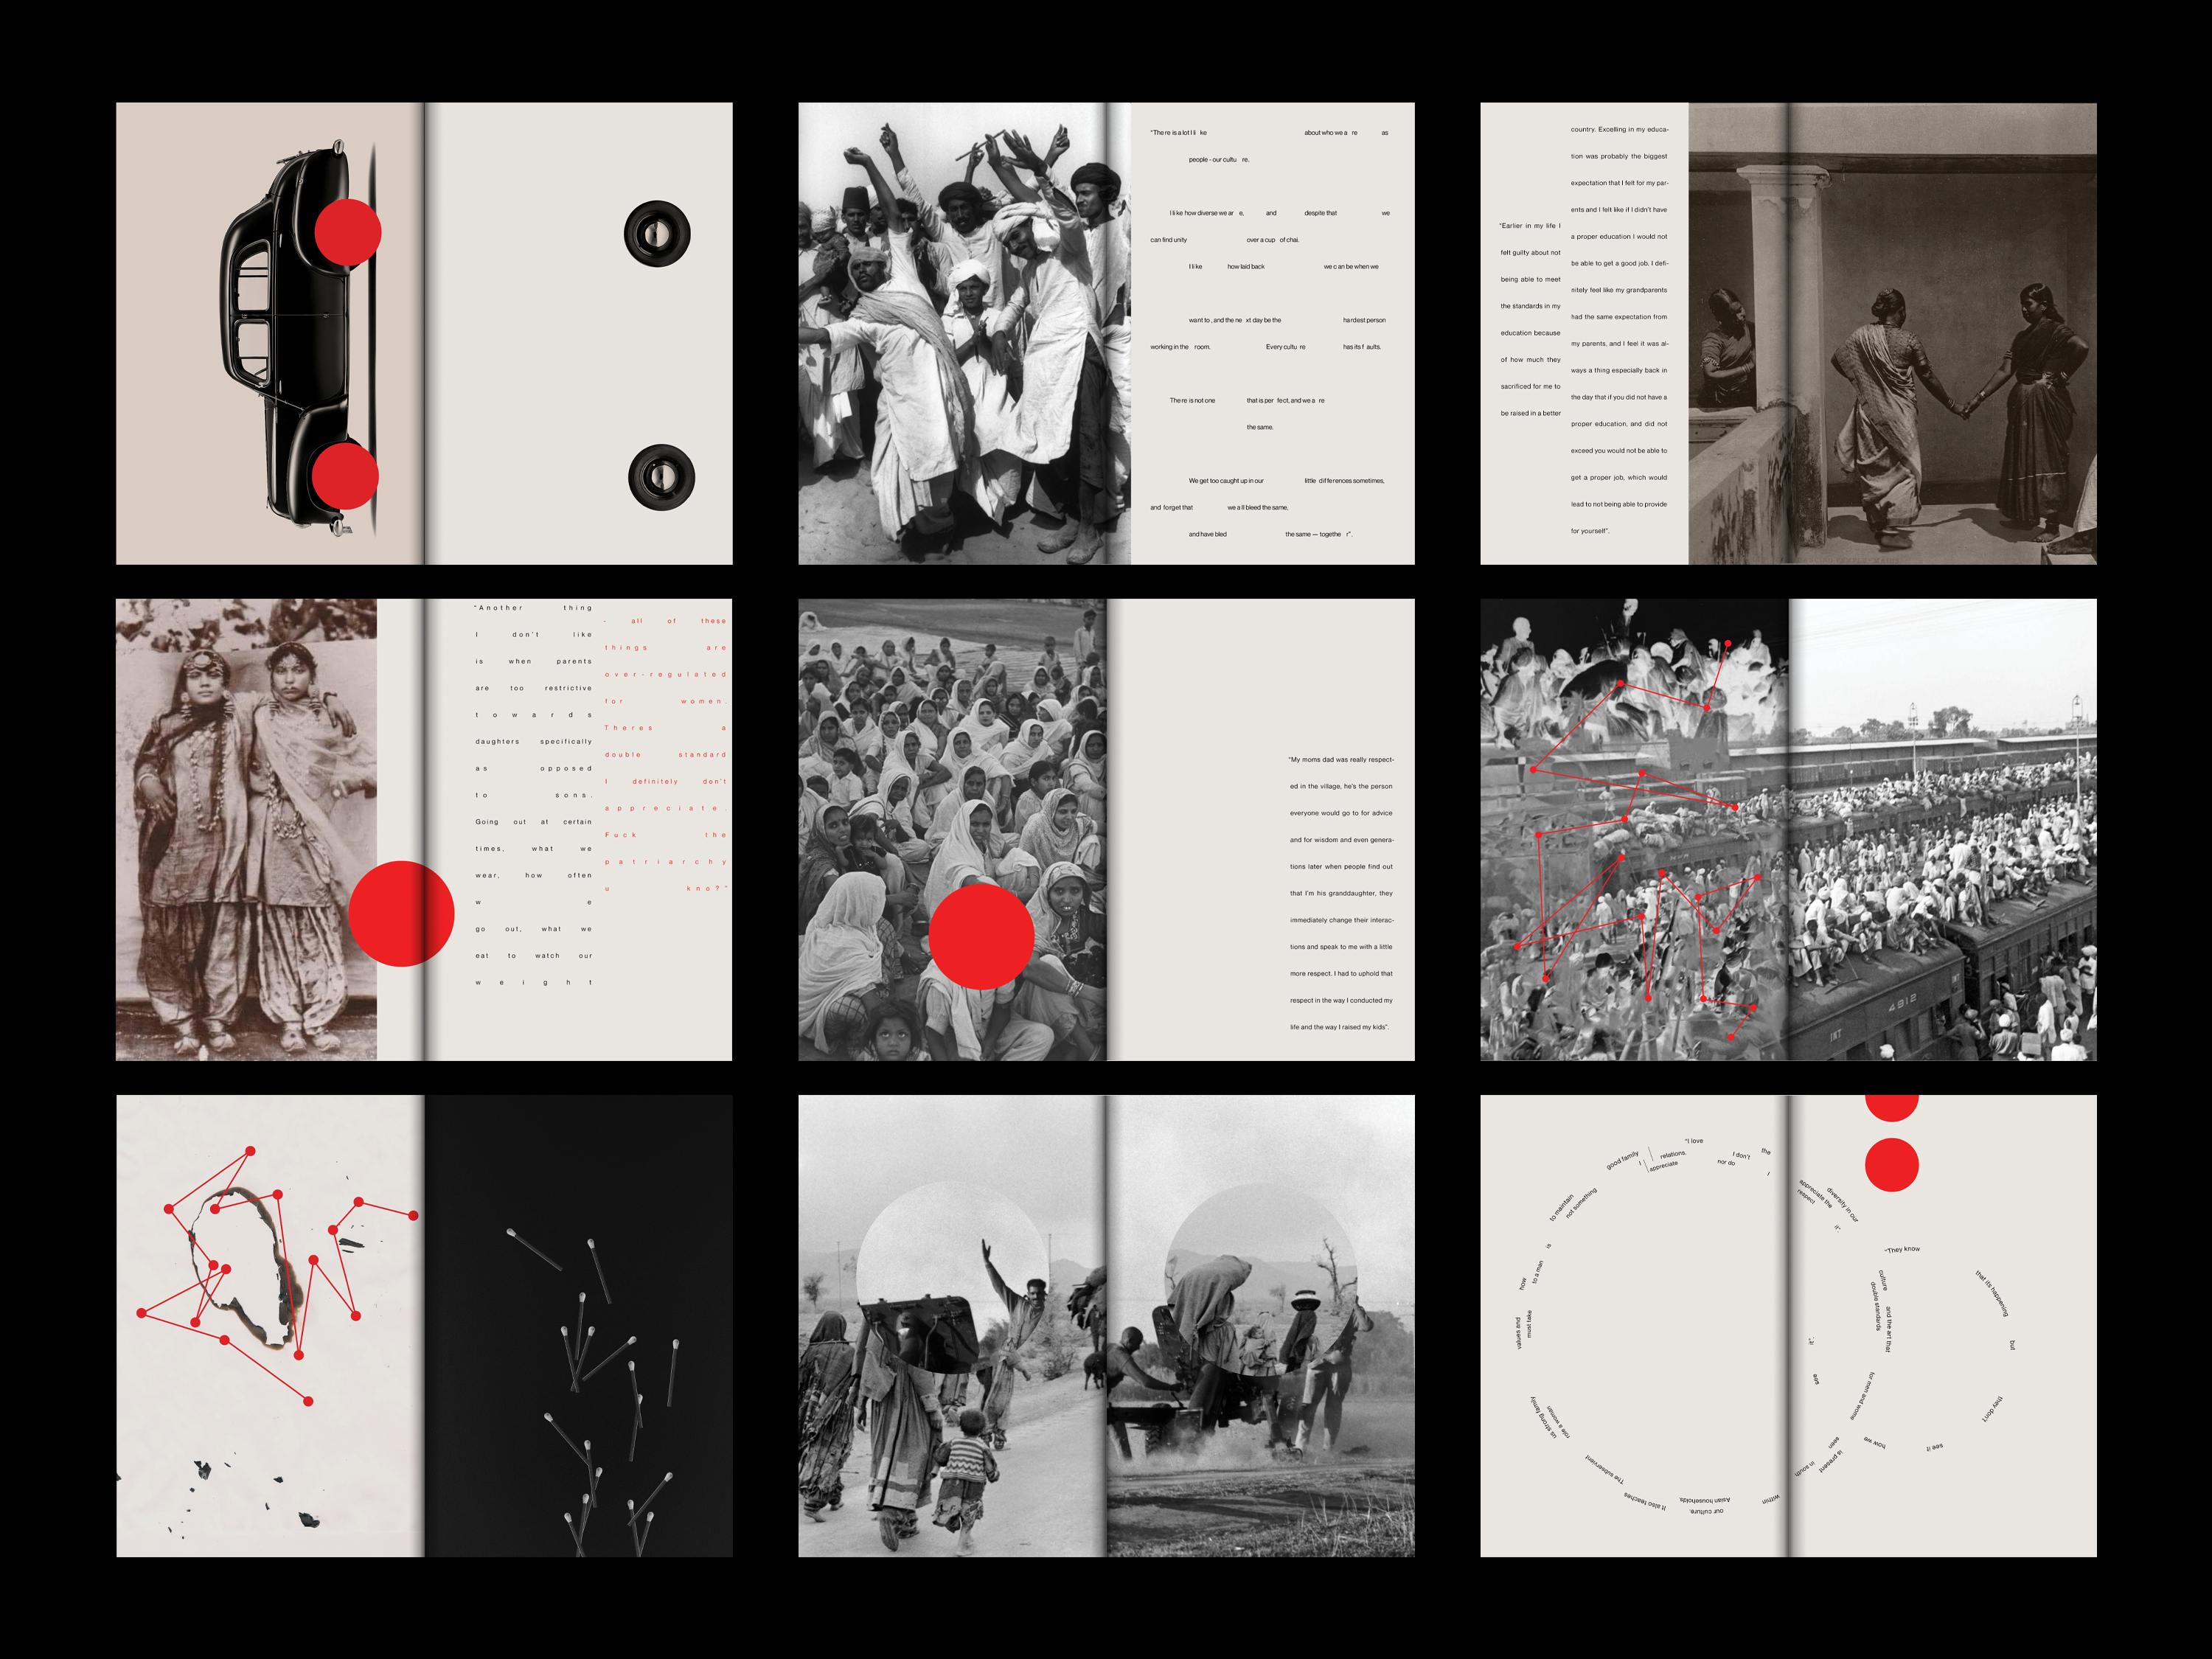 A grid of images that show each page of Maham Momin's zine project. Images include black and white photos of people in South Asia overlaid with red dots and lines, accompanied by text laid out in a non-linear style.